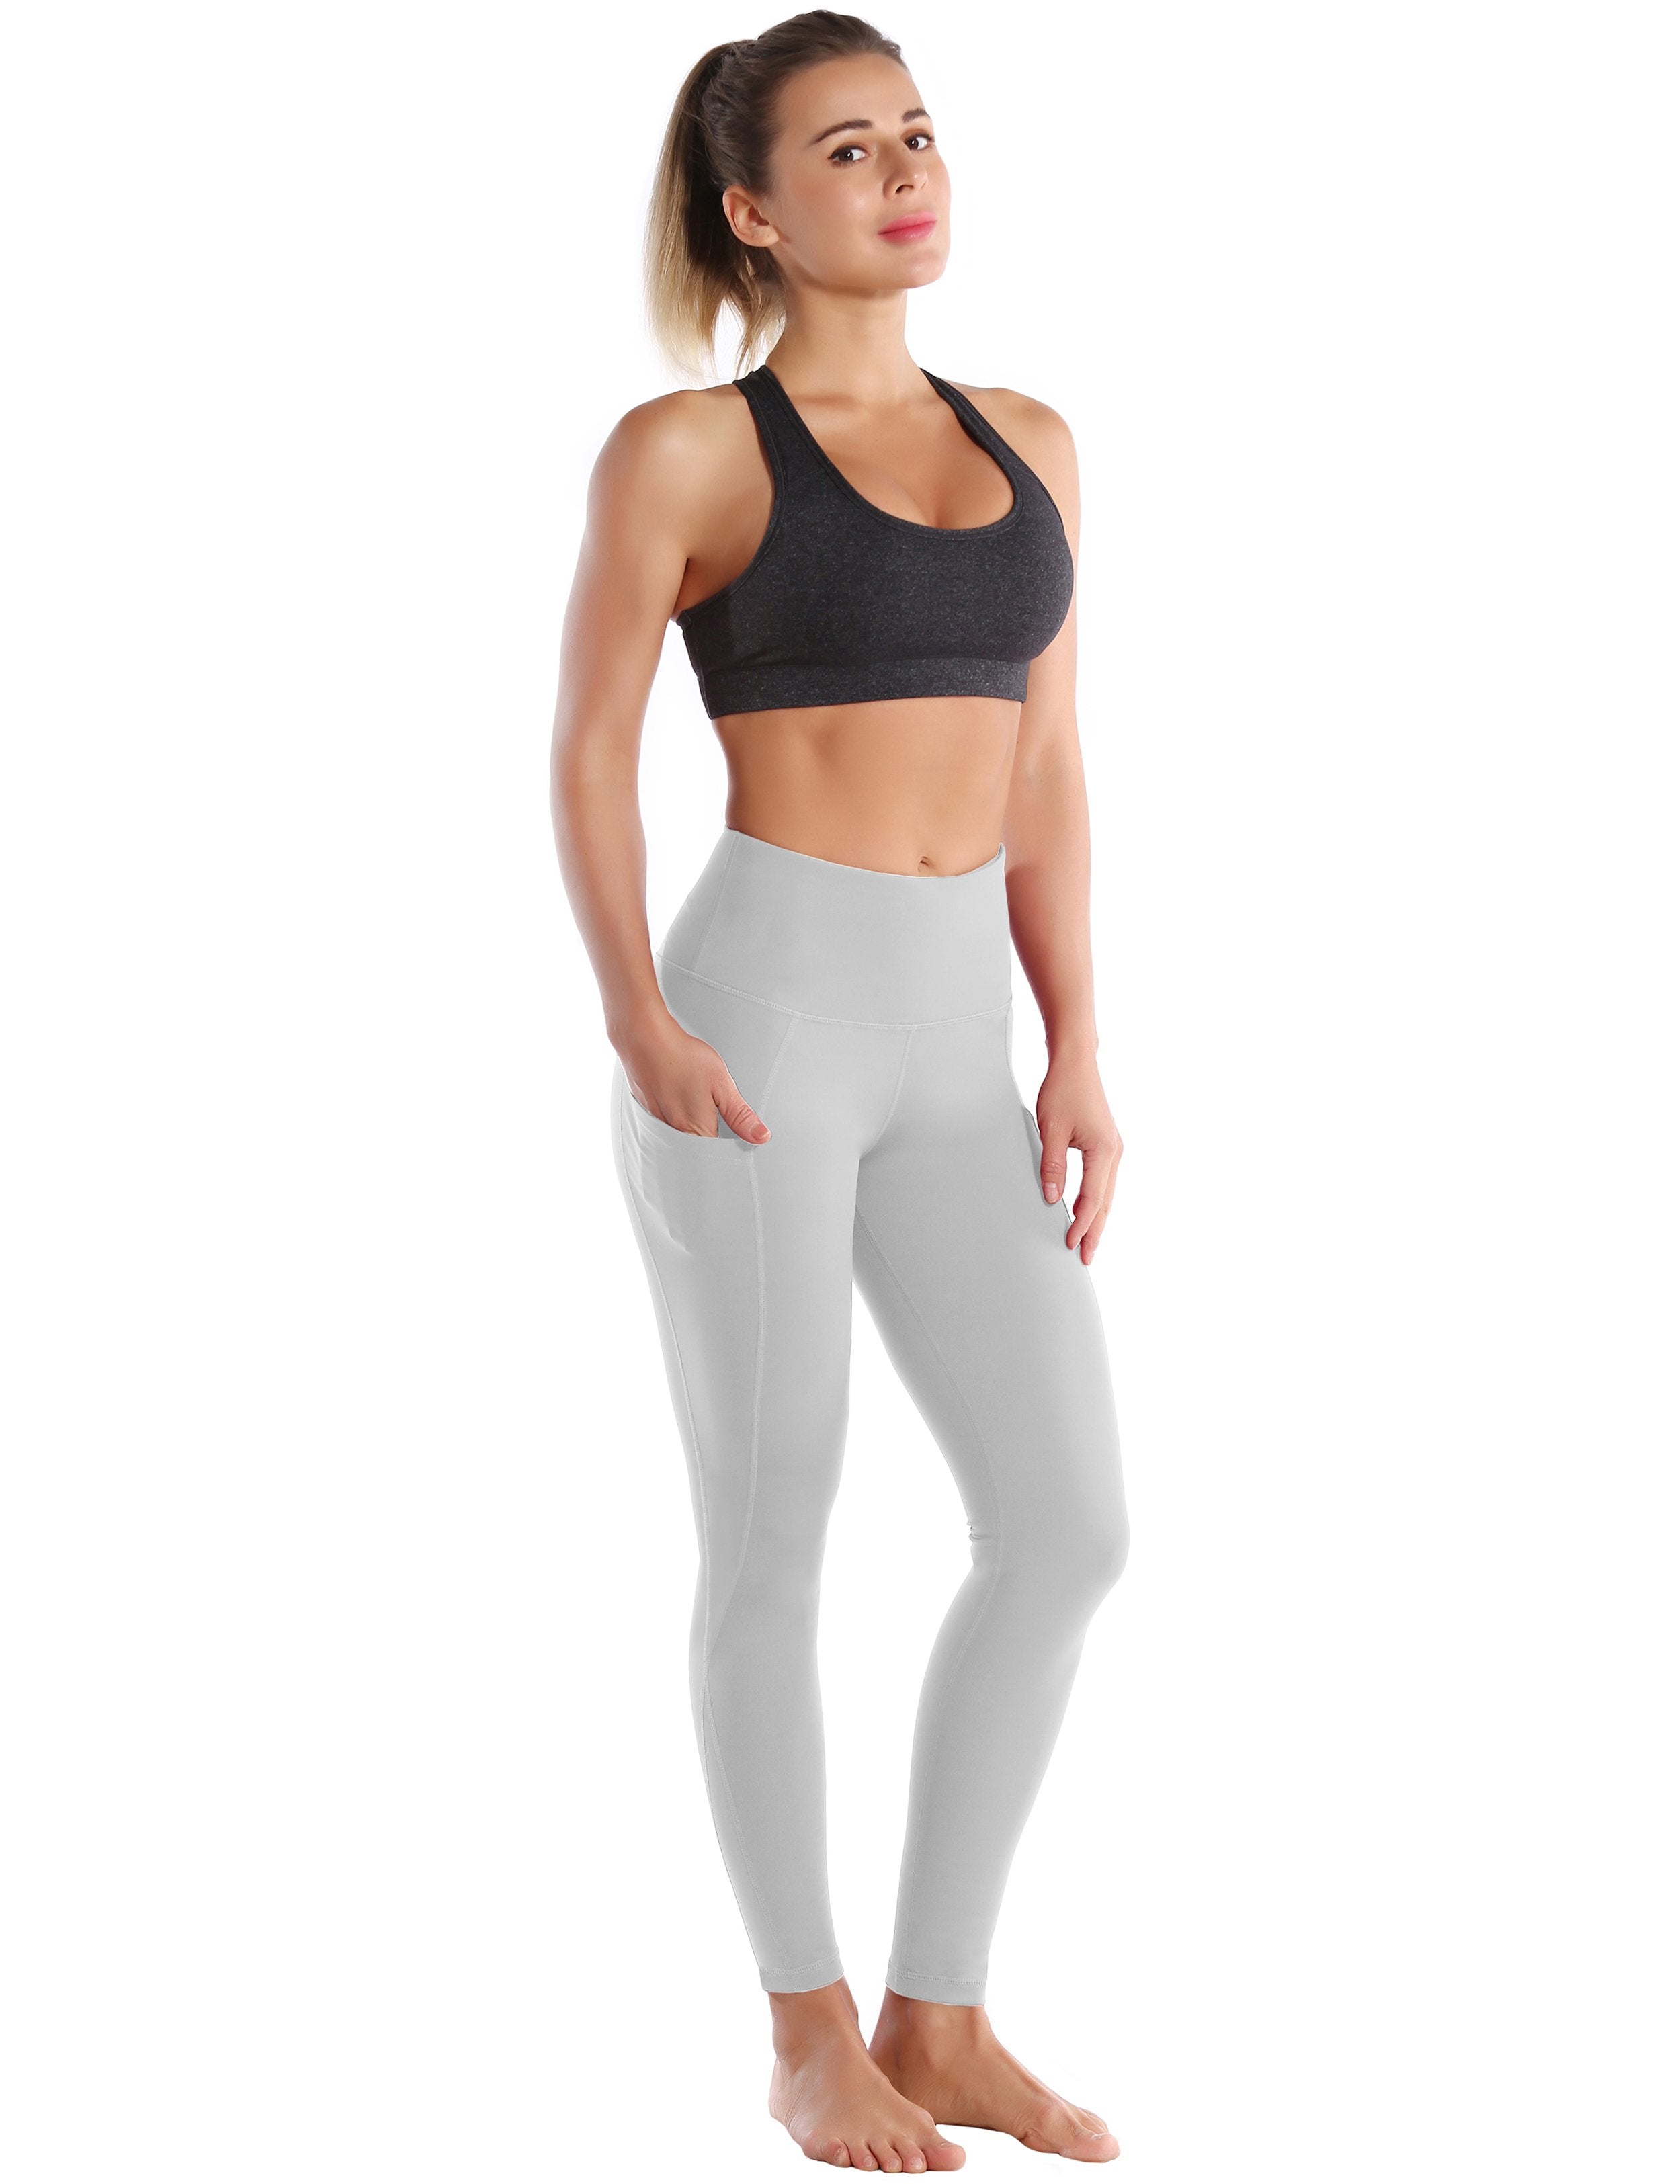 High Waist Side Pockets yogastudio Pants lightgray 75% Nylon, 25% Spandex Fabric doesn't attract lint easily 4-way stretch No see-through Moisture-wicking Tummy control Inner pocket